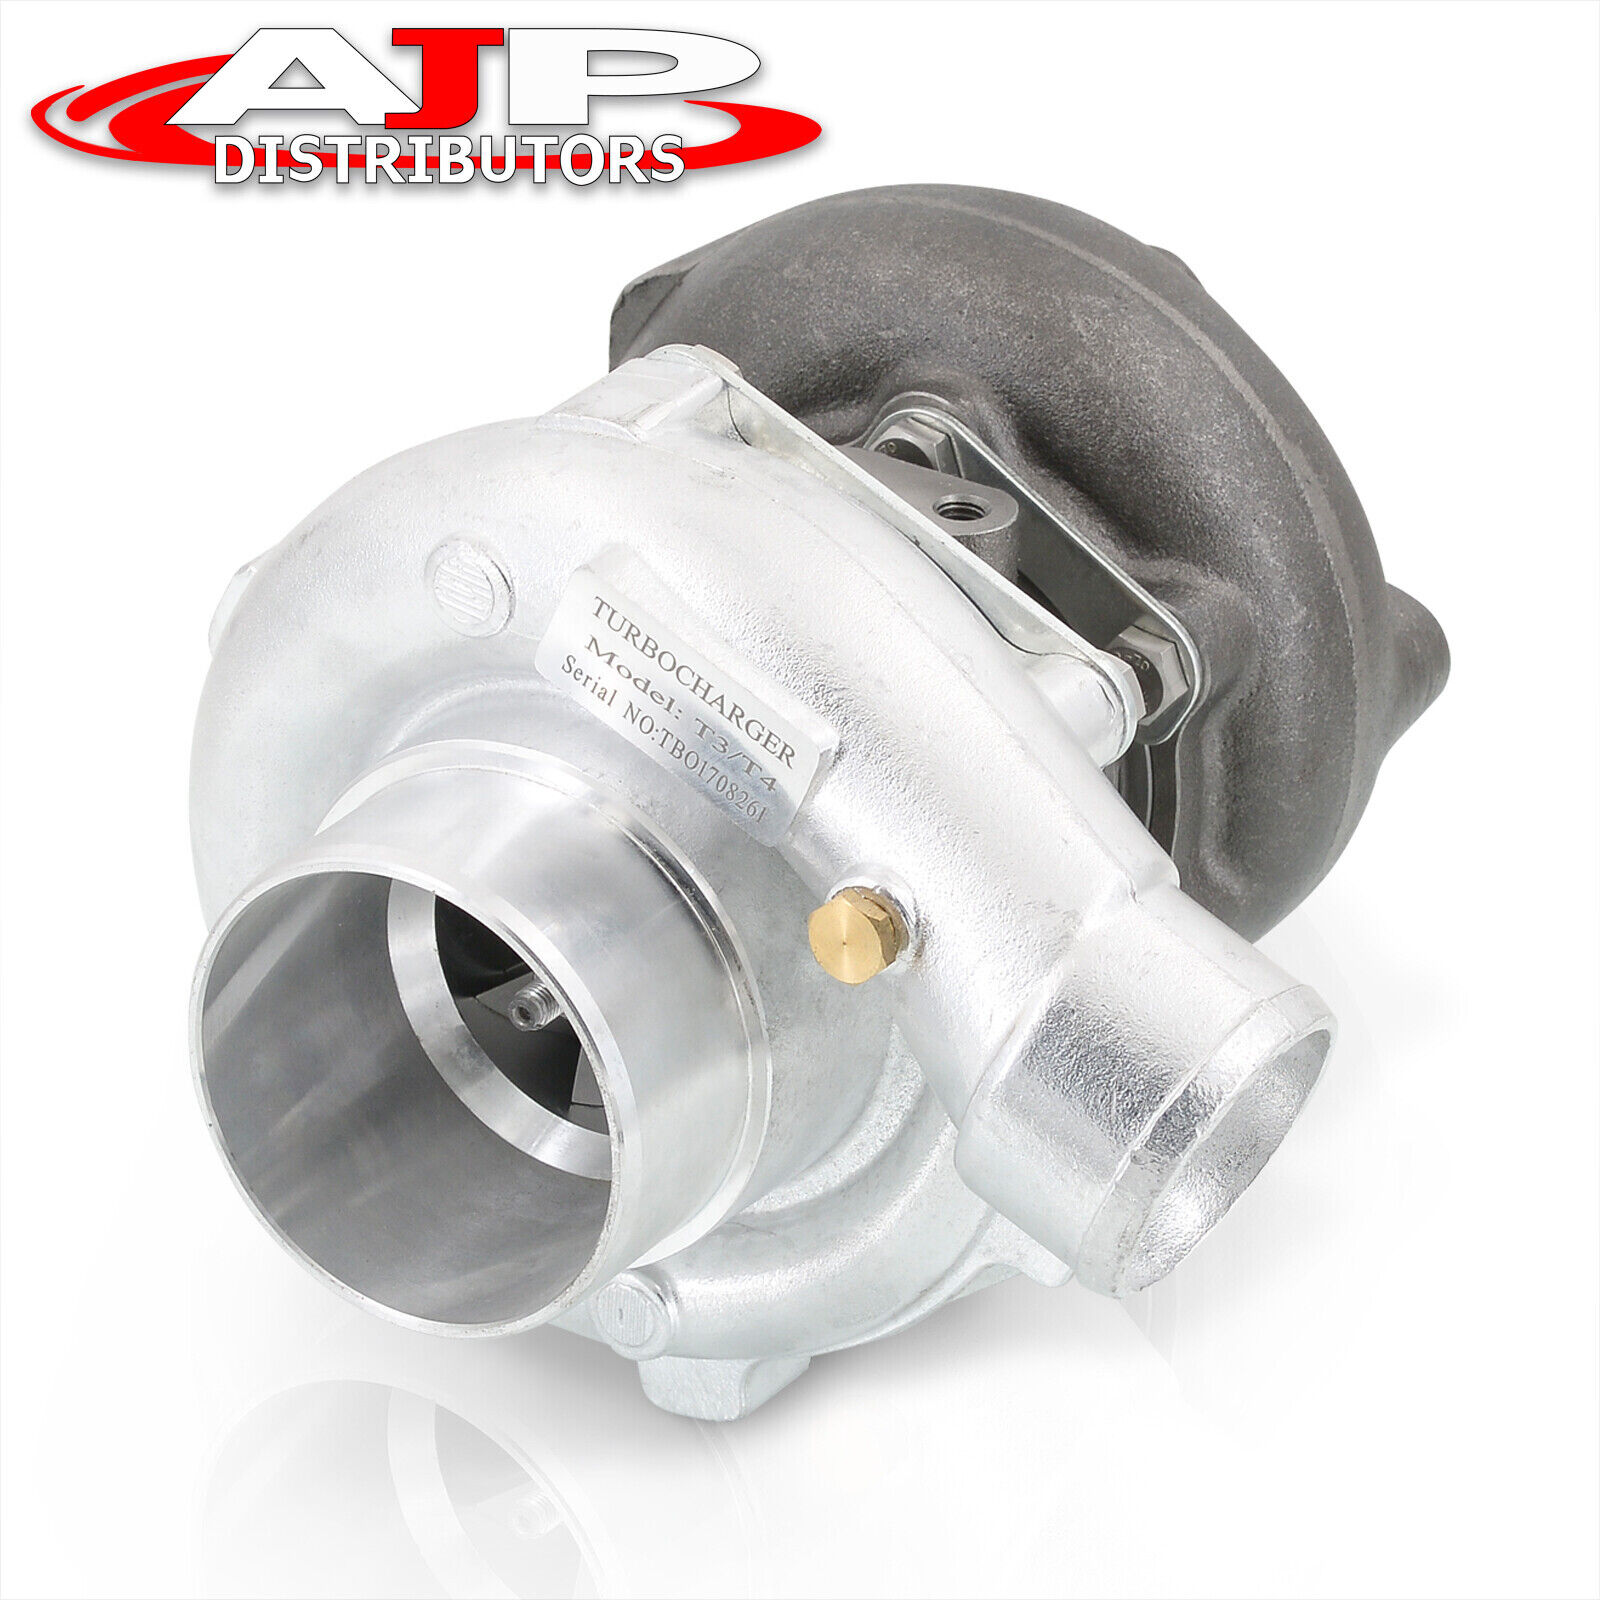 T3/T4 .57AR Hybrid Turbo Charger Upgrade For Integra RSX Civic CRX B16 B18 Swap